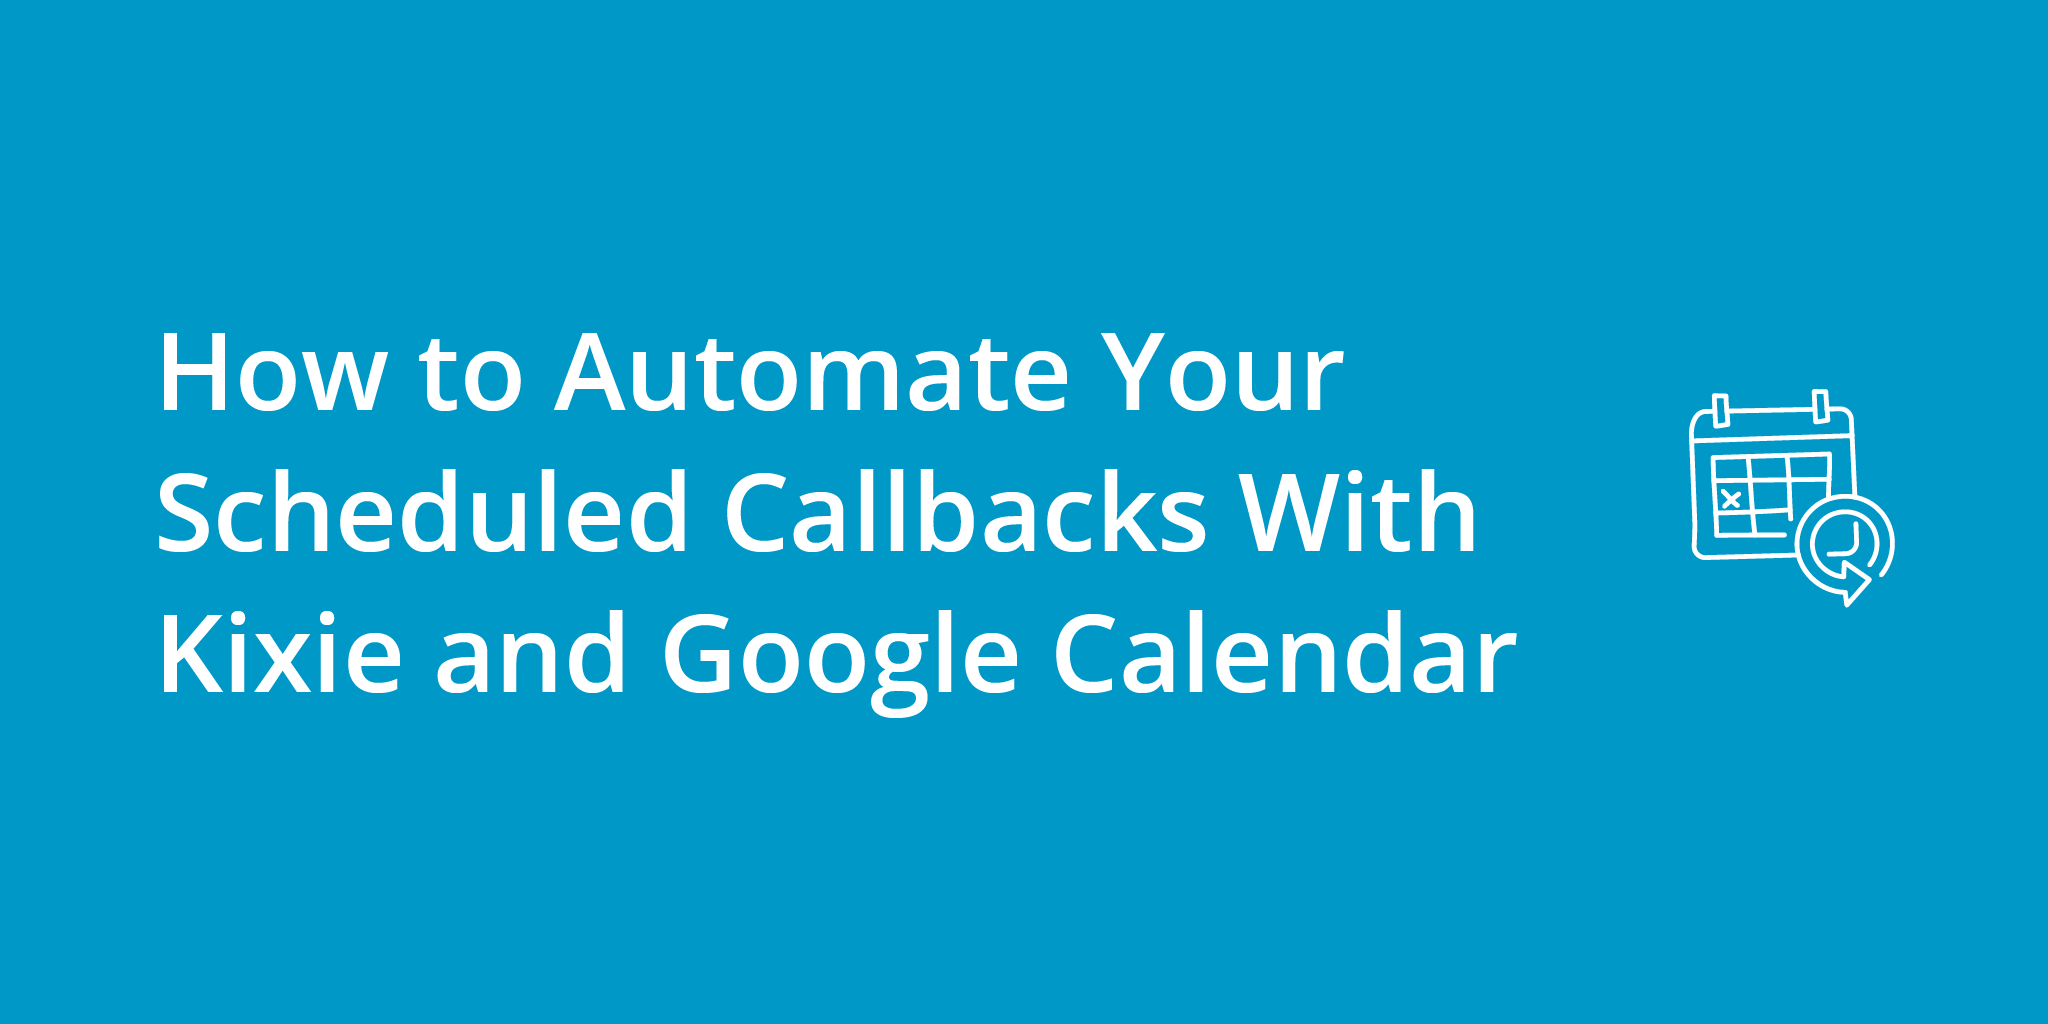 How to Automate Your Scheduled Callbacks With Kixie and Google Calendar | Telephones for business